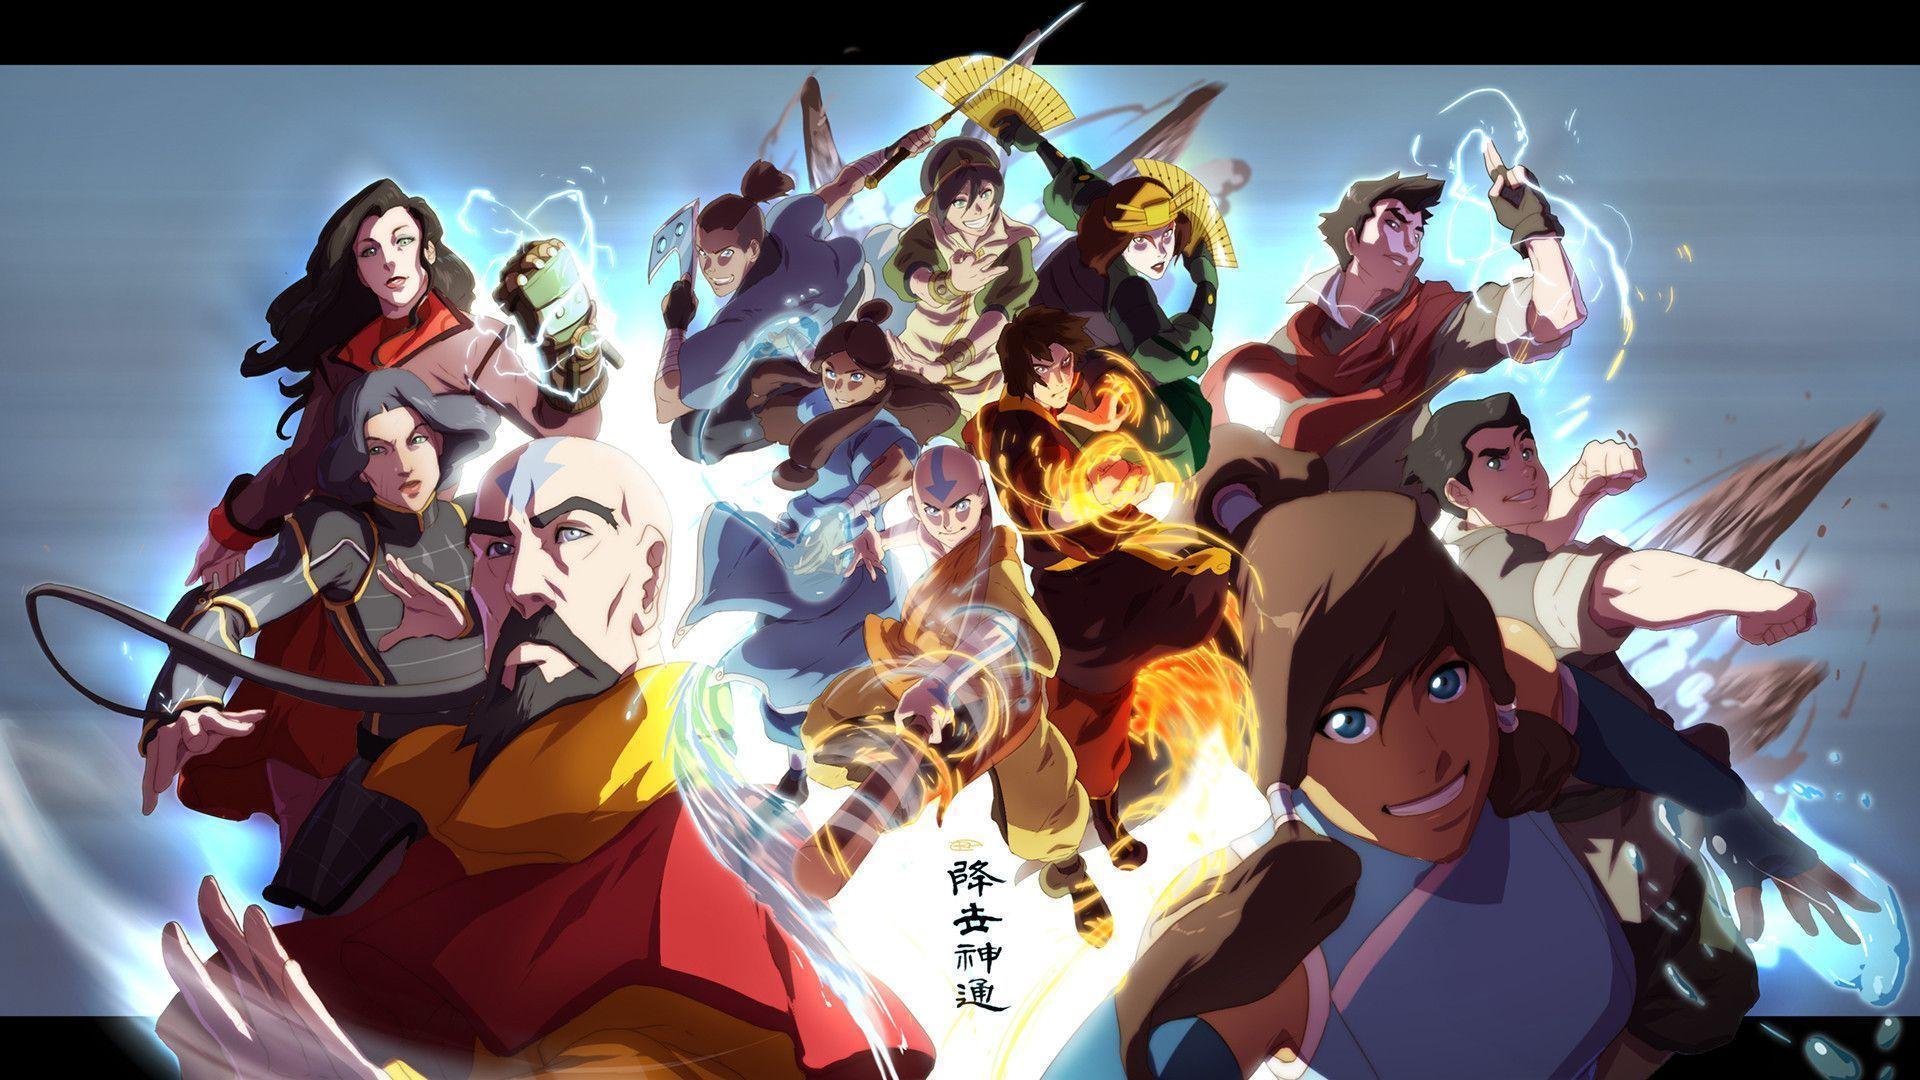 Avatar: The Last Airbender Wallpapers - Wallpaper Cave